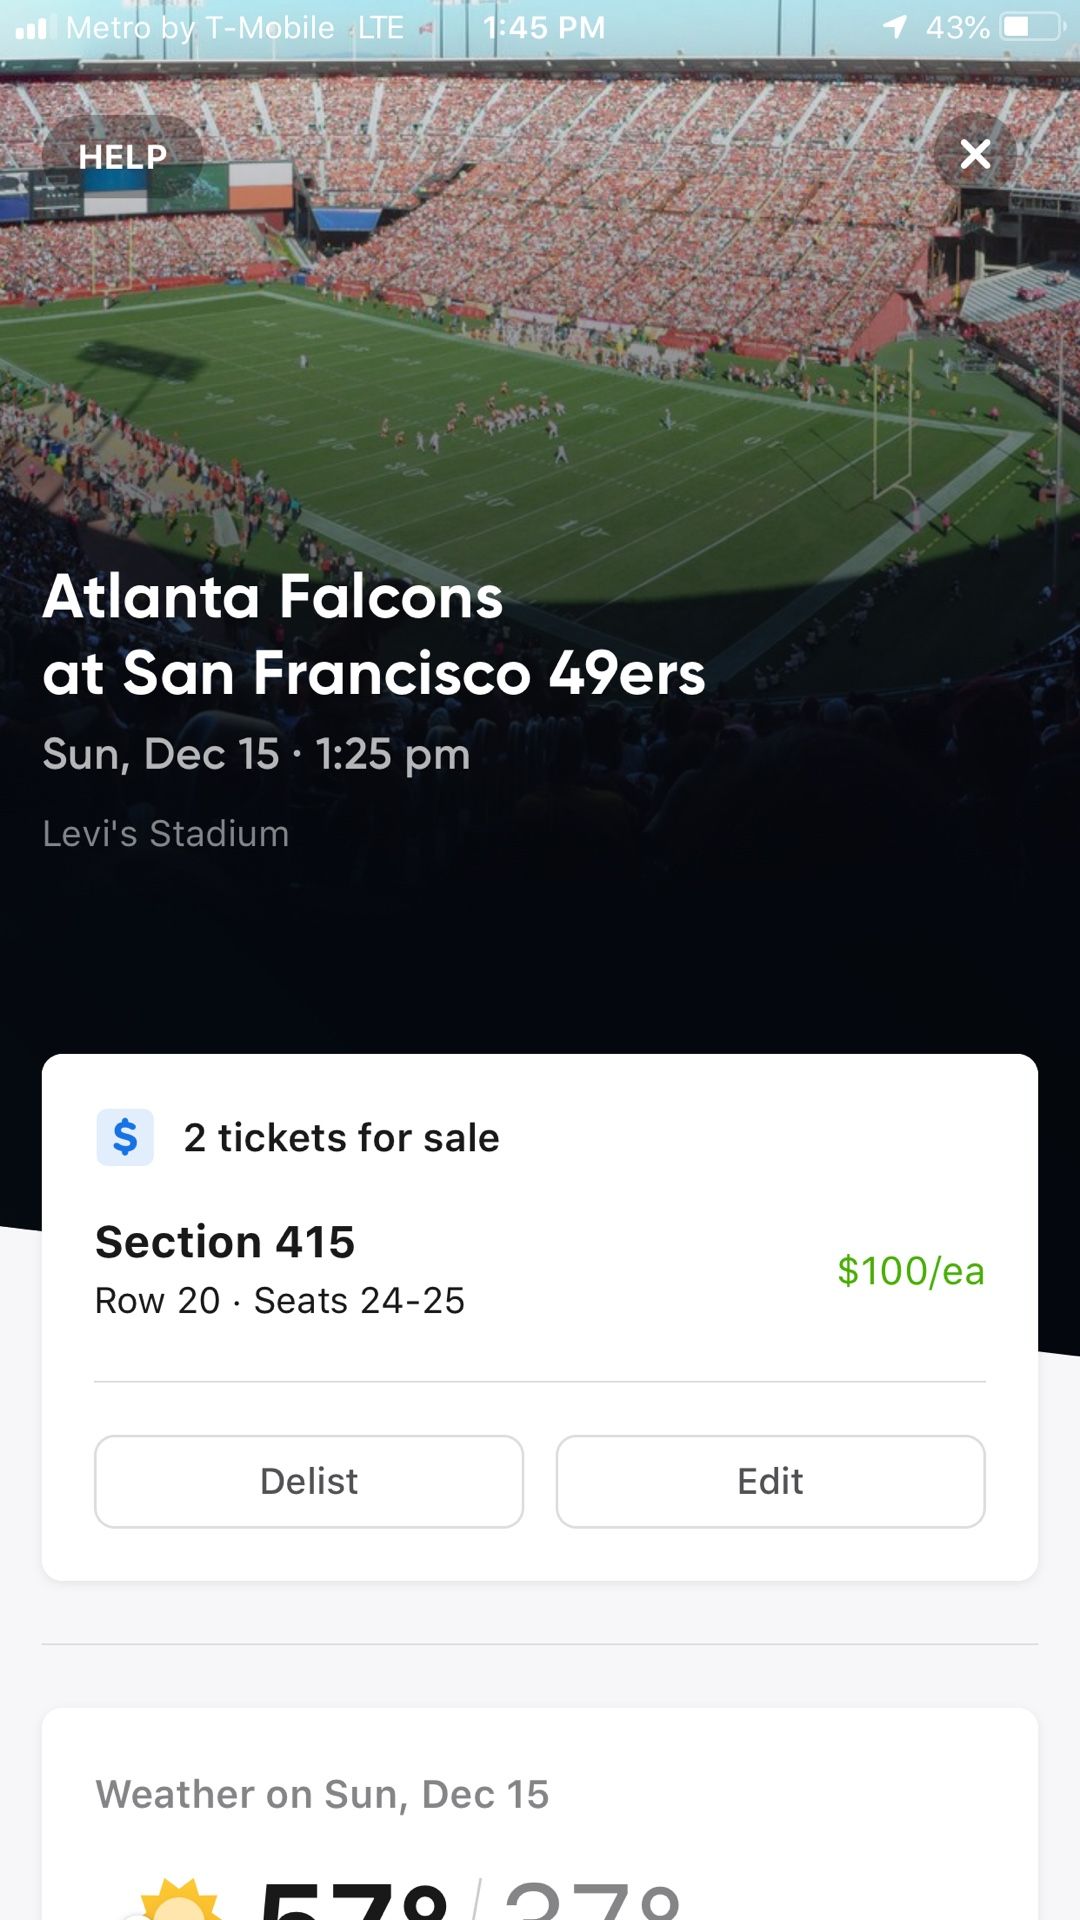 Tickets to 49ers game this Sunday!